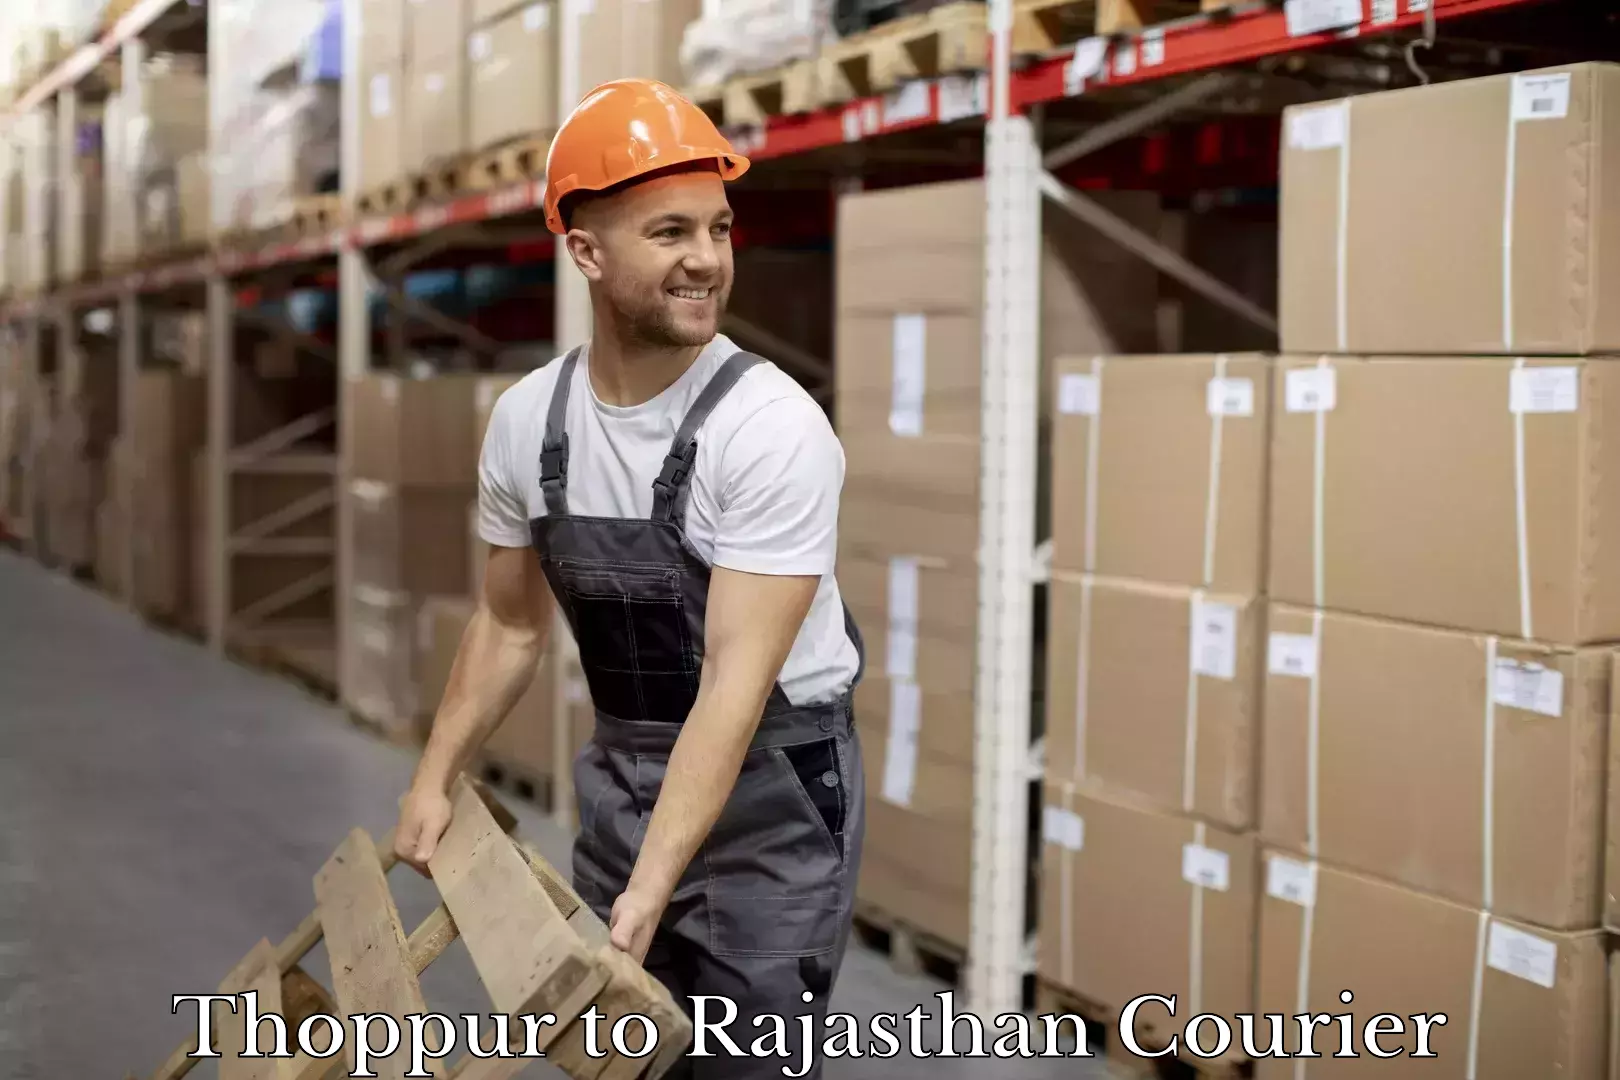 Efficient order fulfillment Thoppur to Rajasthan